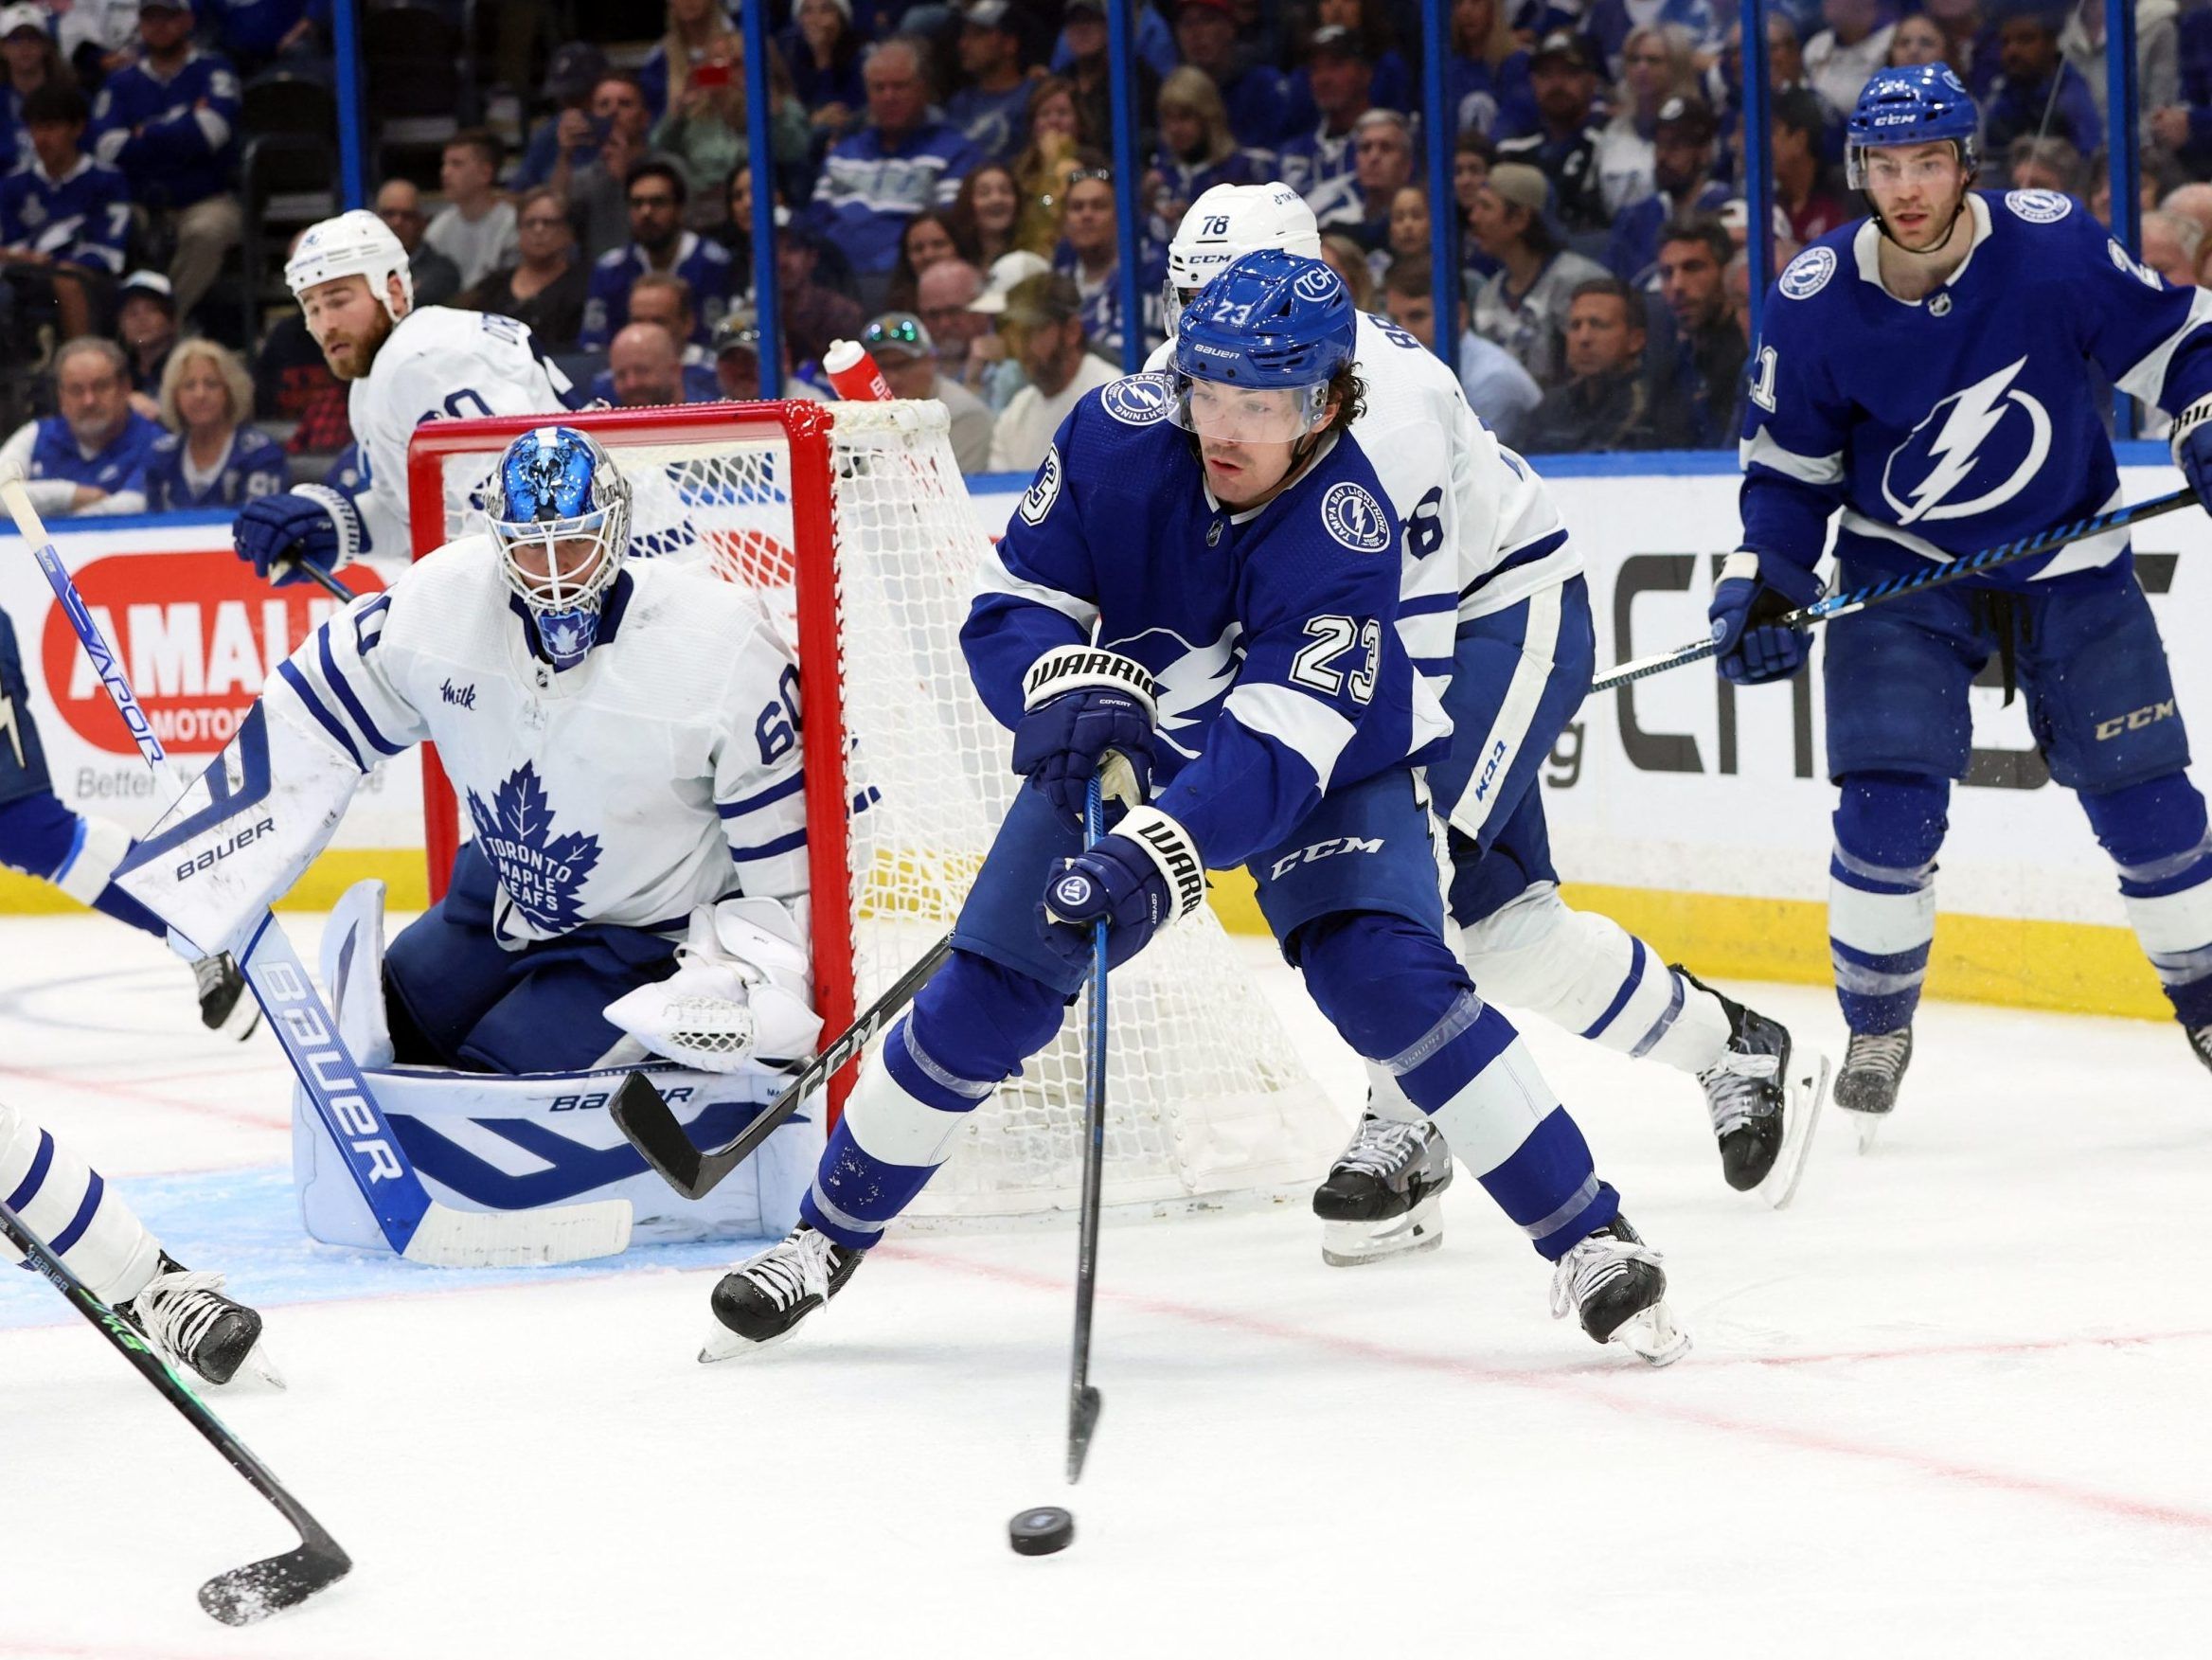 NHL playoffs: Bolts-Leafs highlight openers